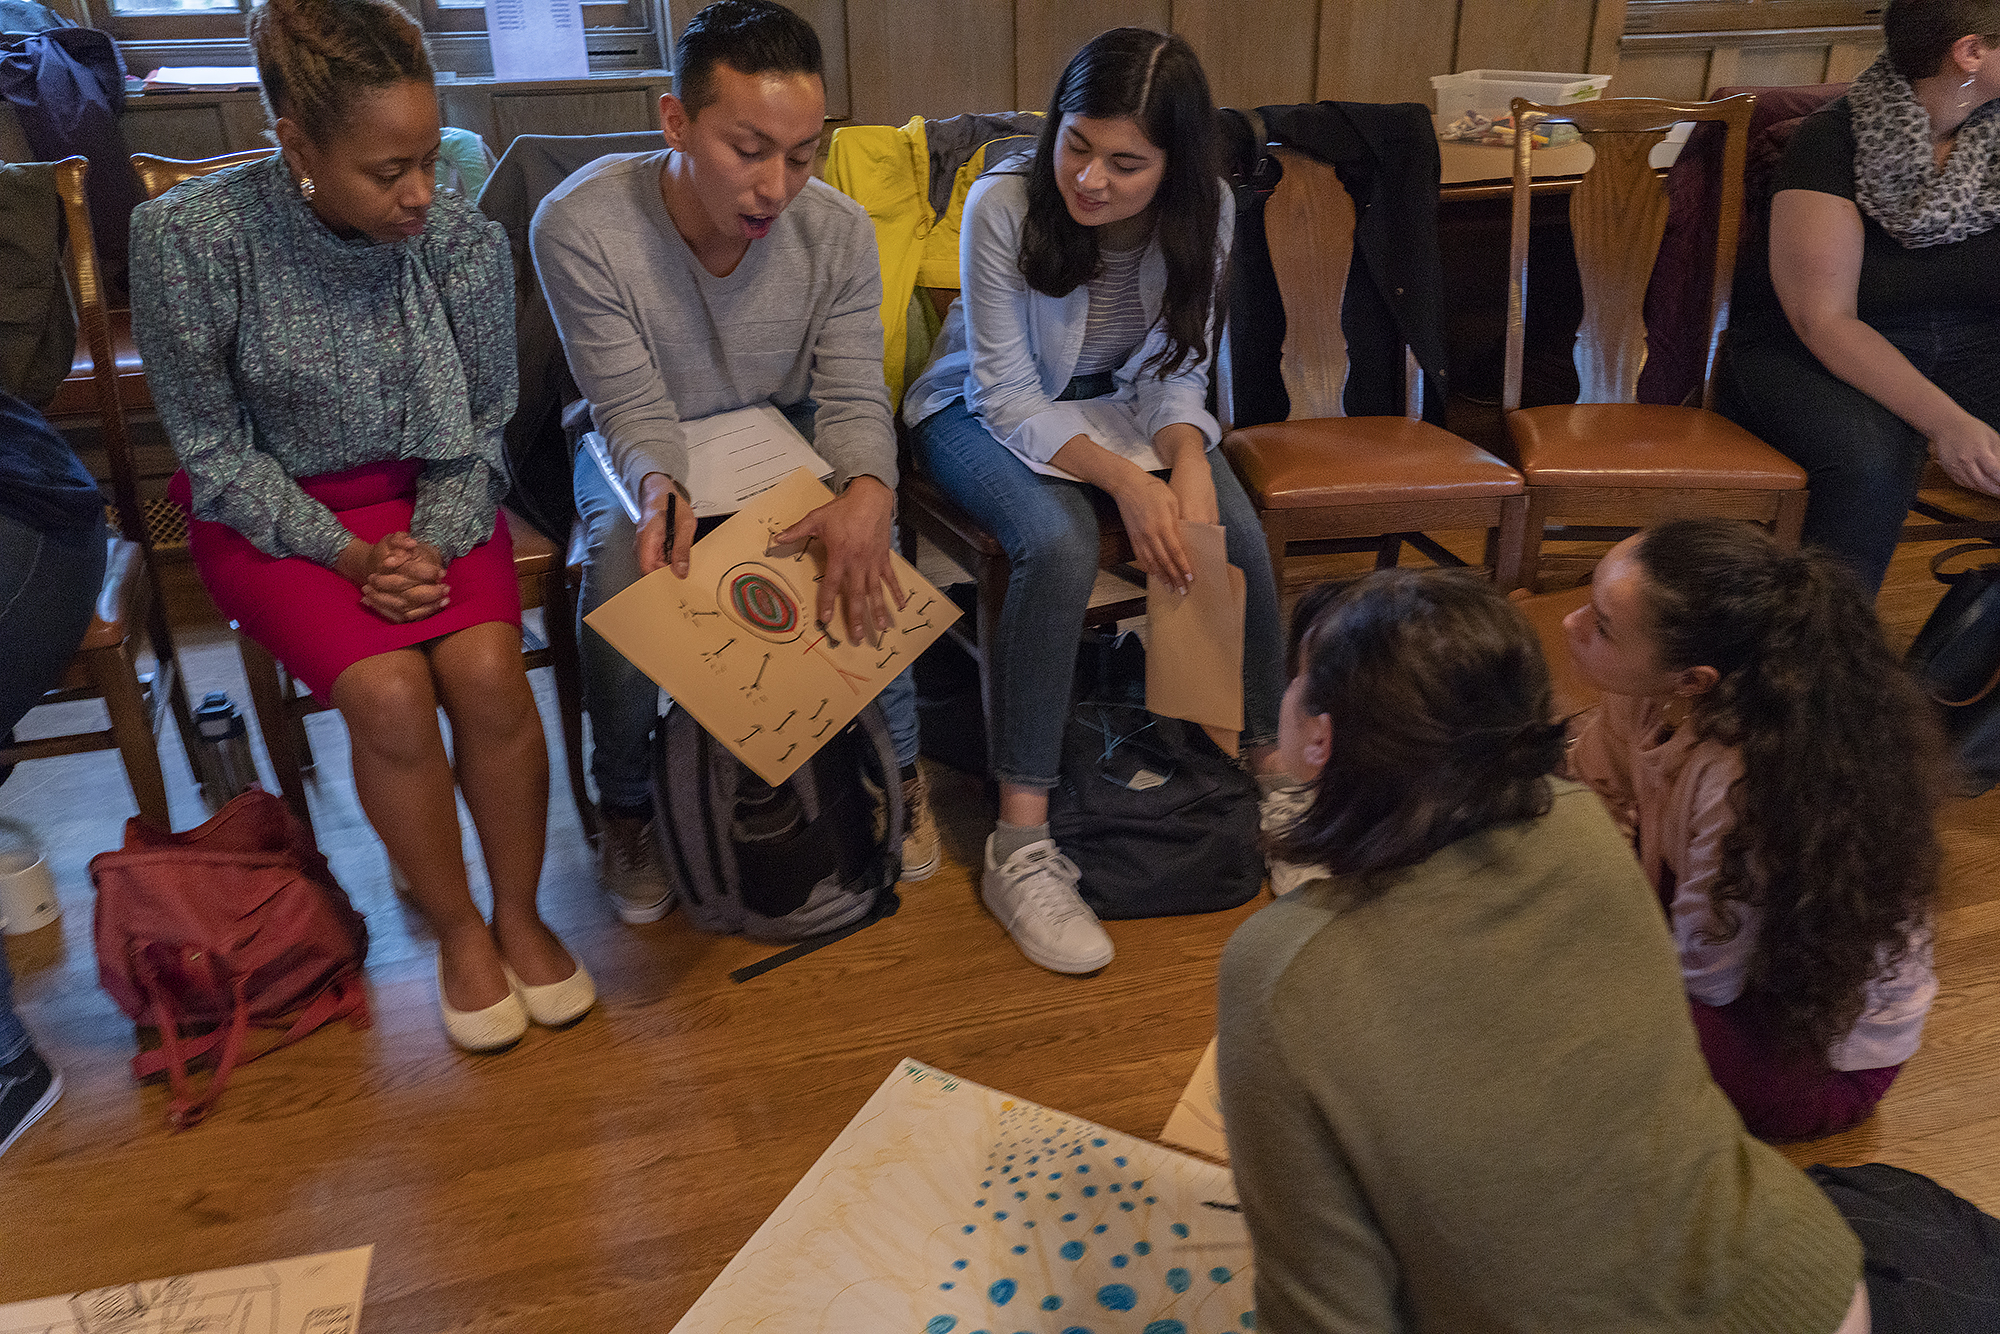 Image: Leah Gipson (at left, in pink skirt) works with participants in an art therapy workshop at Hull-House in October. Photo courtesy of Jane Addams Hull-House Museum / Jesse Meredith.